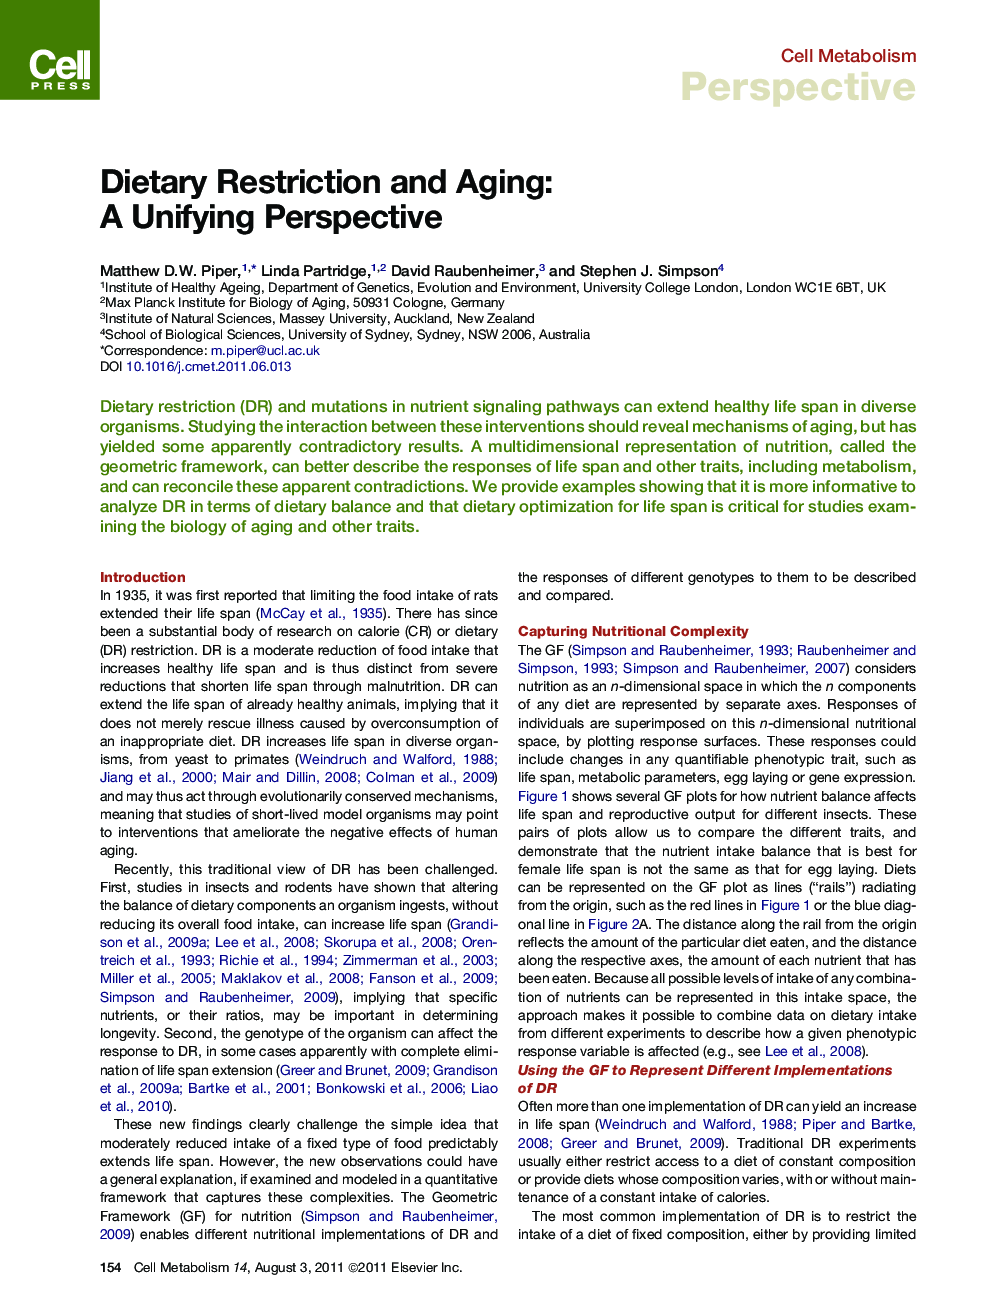 Dietary Restriction and Aging: A Unifying Perspective